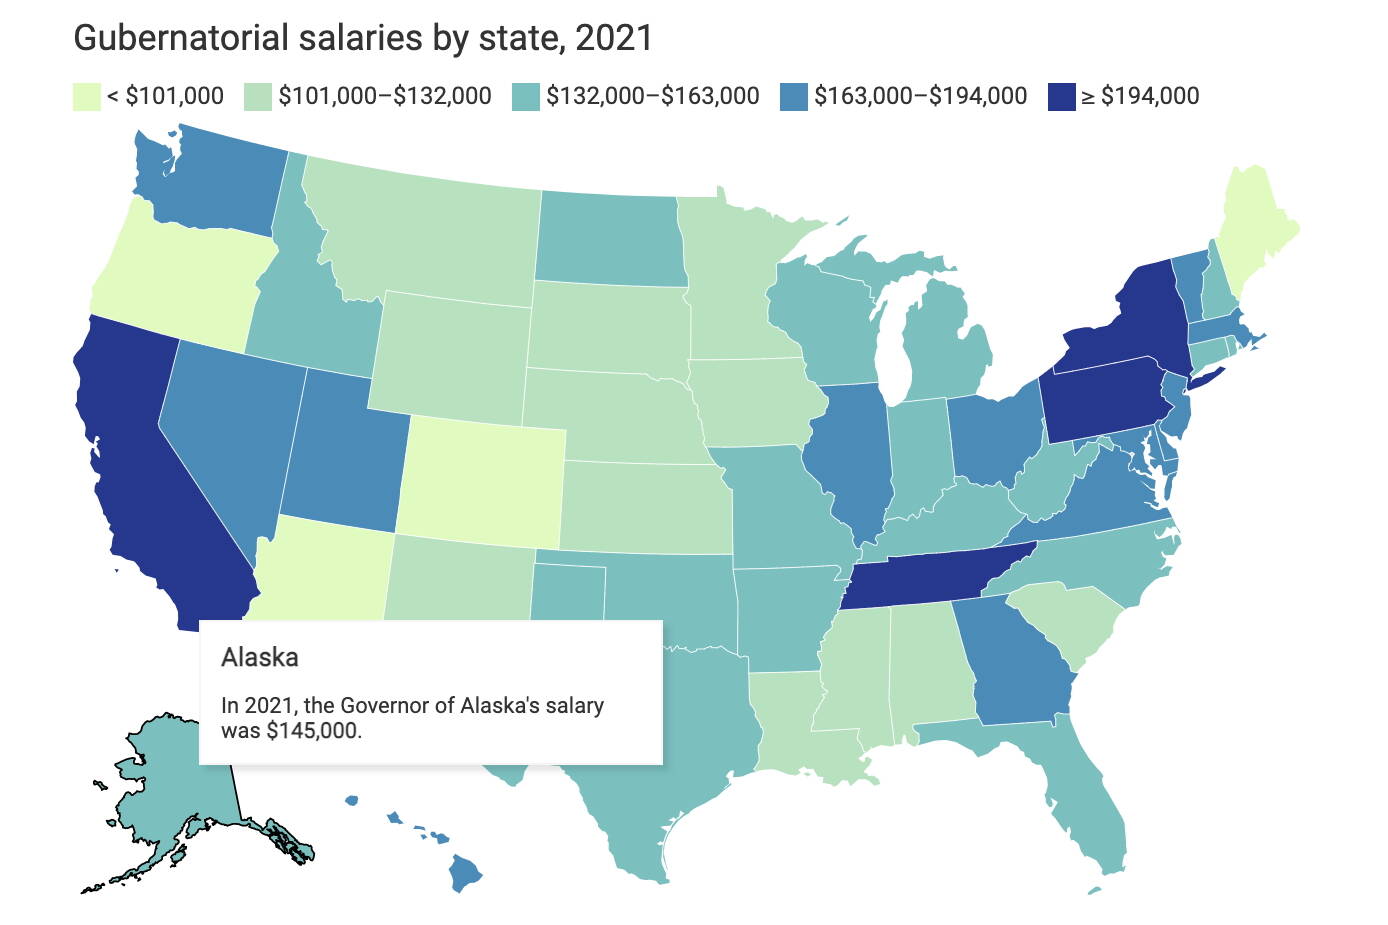 A map shows the salary for Alaska’s governor of $145,000 a year is midrange compared to other states. A proposal rejected by the state Senate that would raise the governor’s salary to about $176,000, which would rank 10th among states rather than the current ranking of 28th. (Sources: Book of the States, Ballotpedia)